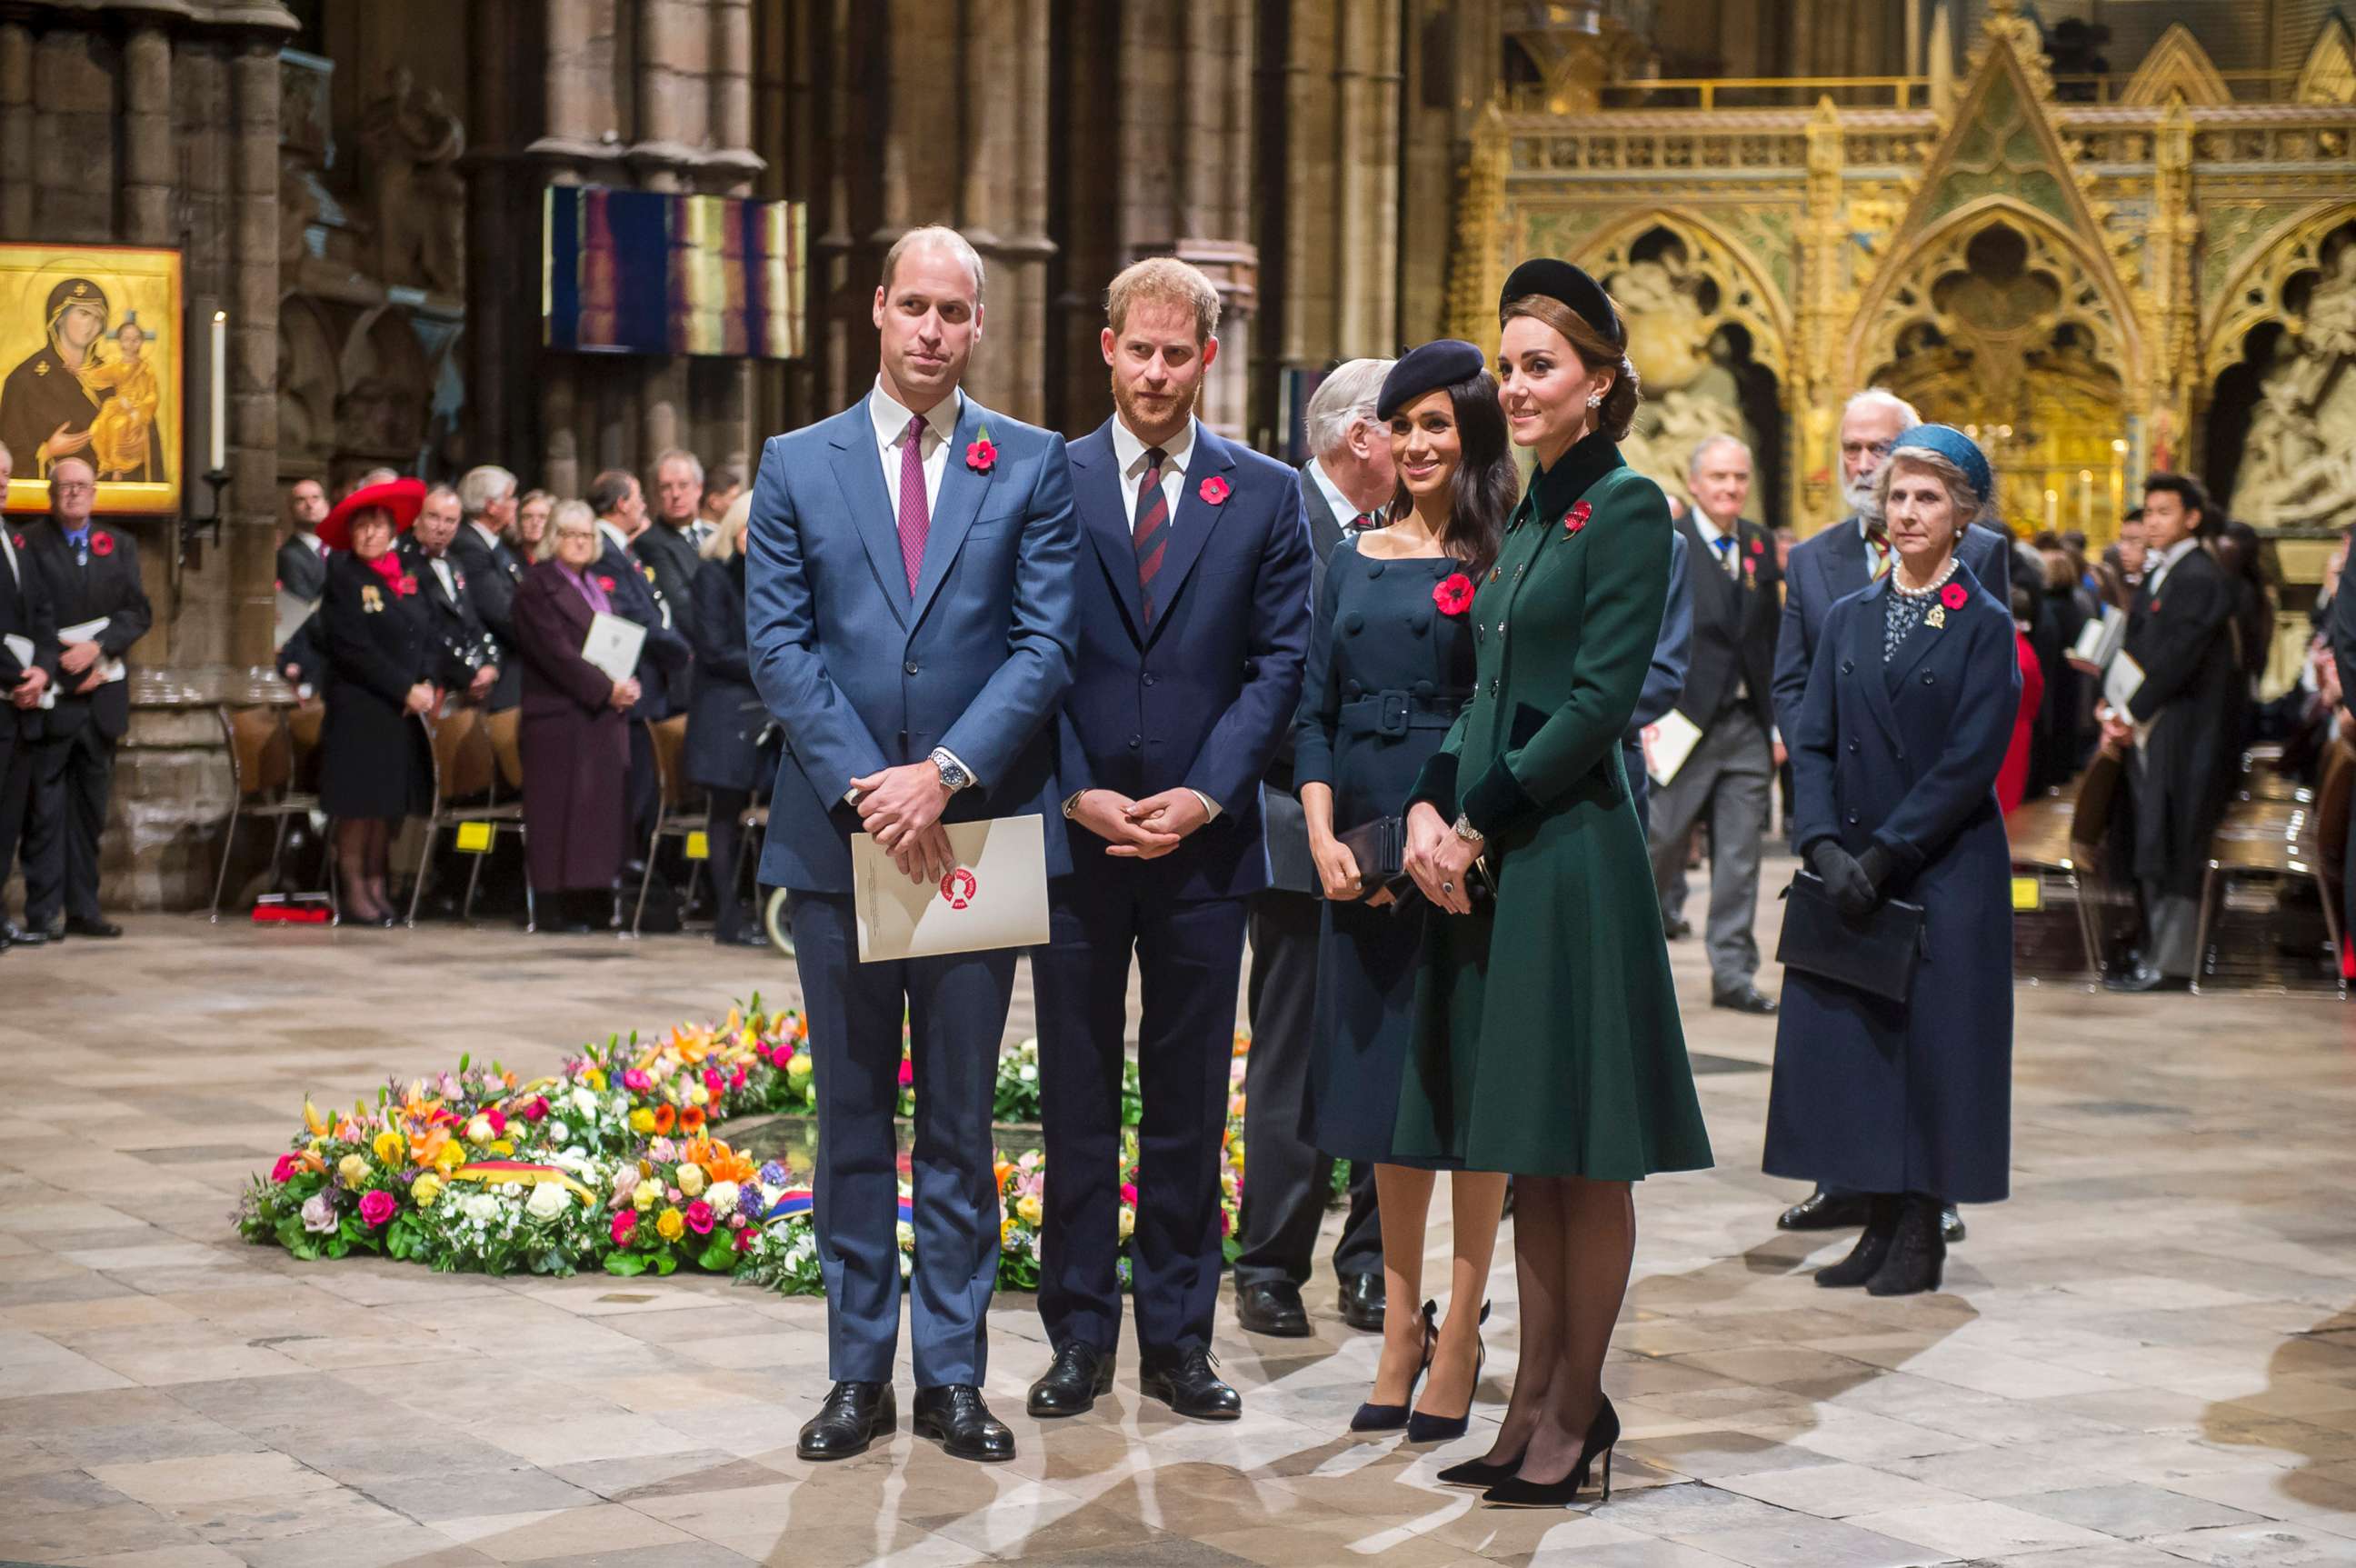 PHOTO: From left, Britain's Prince William, Prince Harry, Meghan, Duchess of Sussex and Catherine, Duchess of Cambridge arrive at Westminster Abbey to attend a service to mark the centenary of the Armistice in central London on Nov. 11, 2018.